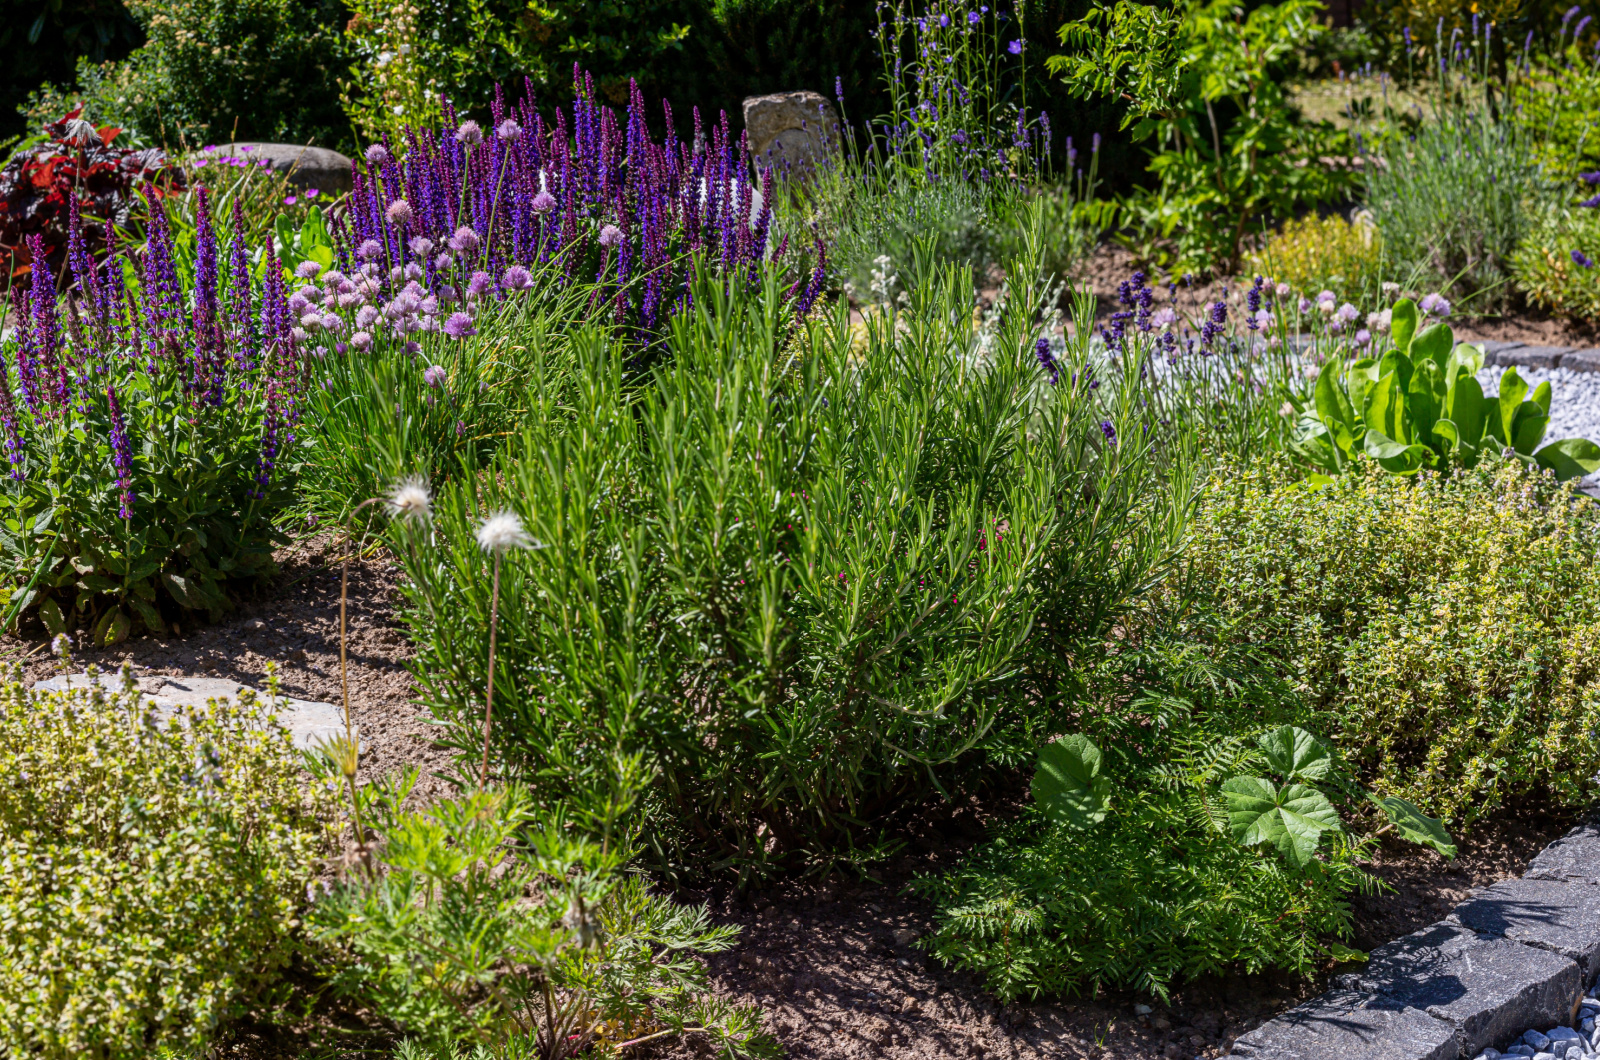 variety of herbs like chive, rosemary, sage in the summer sun